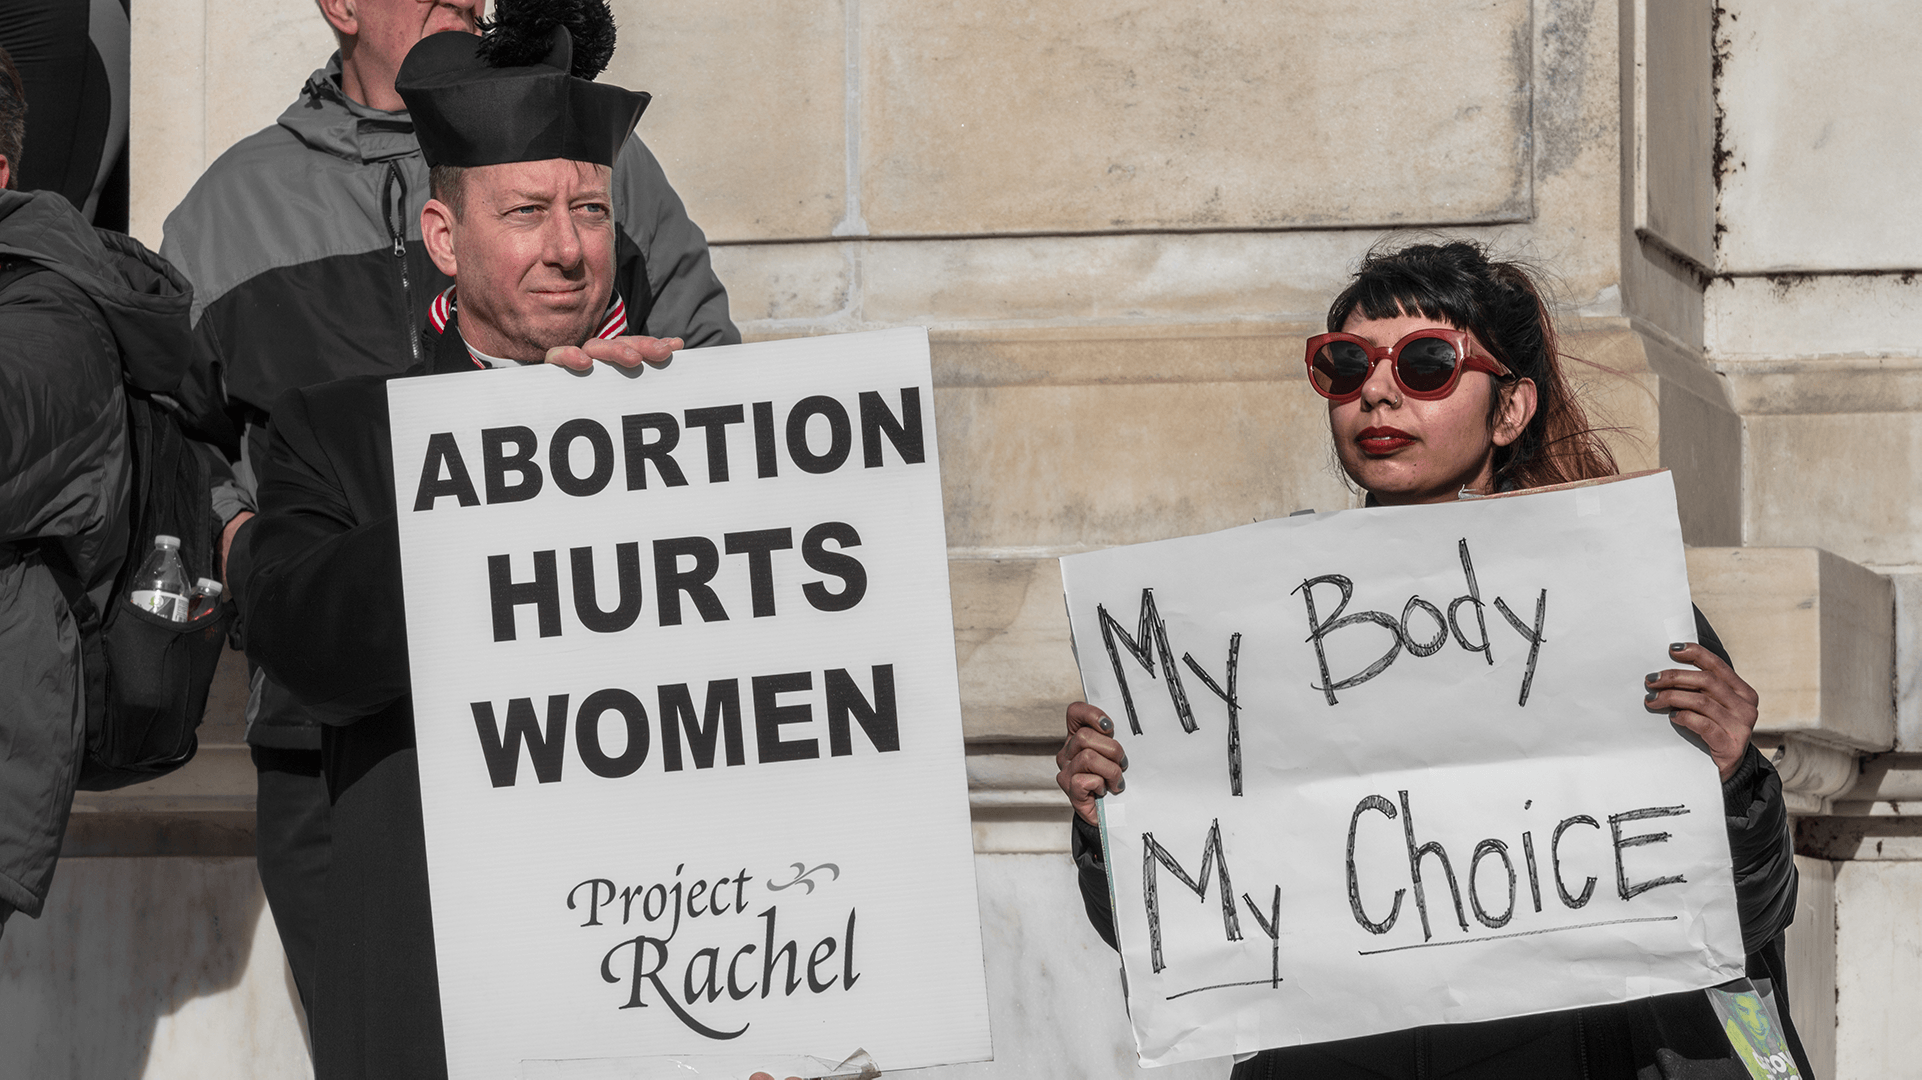 Why Is Abortion Wrong?